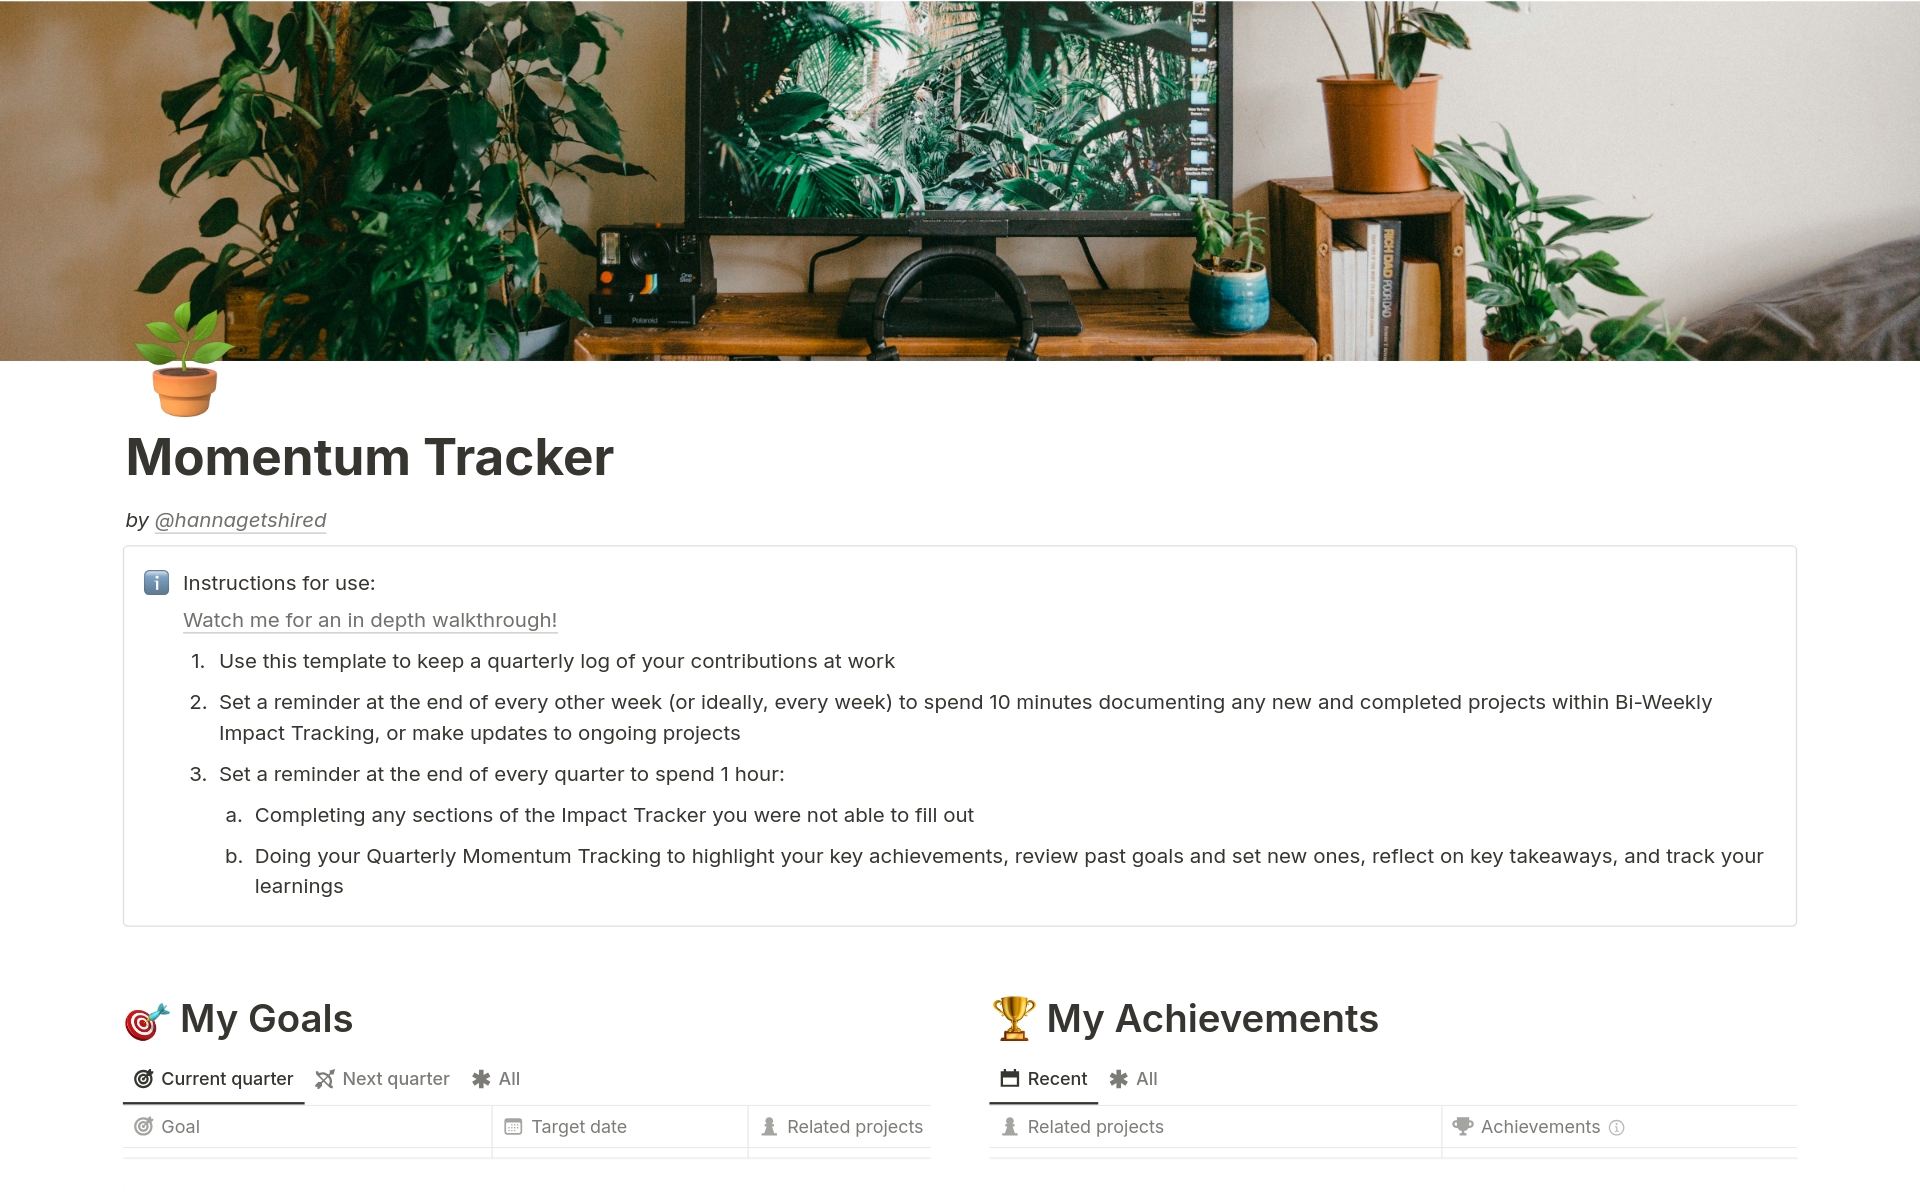 The Momentum Tracker is like a brag sheet, but better! It's a space for you to track your accomplishments and work towards goals, with prompts to encourage self-reflection to understand your skills, growth opportunities, fulfilling work.